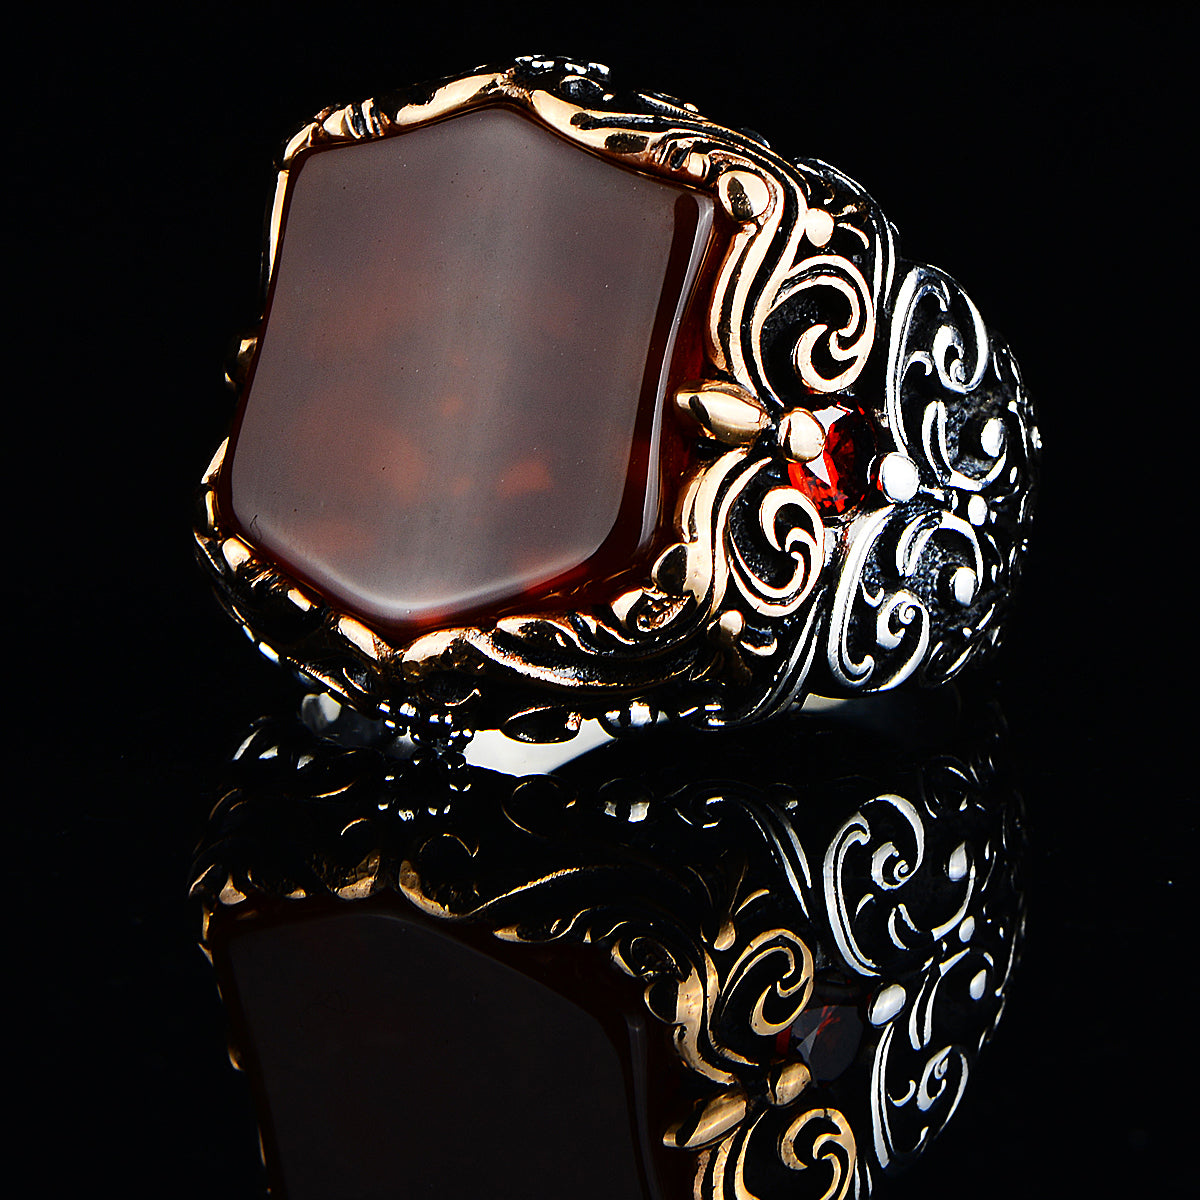 Silver Handmade Ottoman Style Red Agate Ring